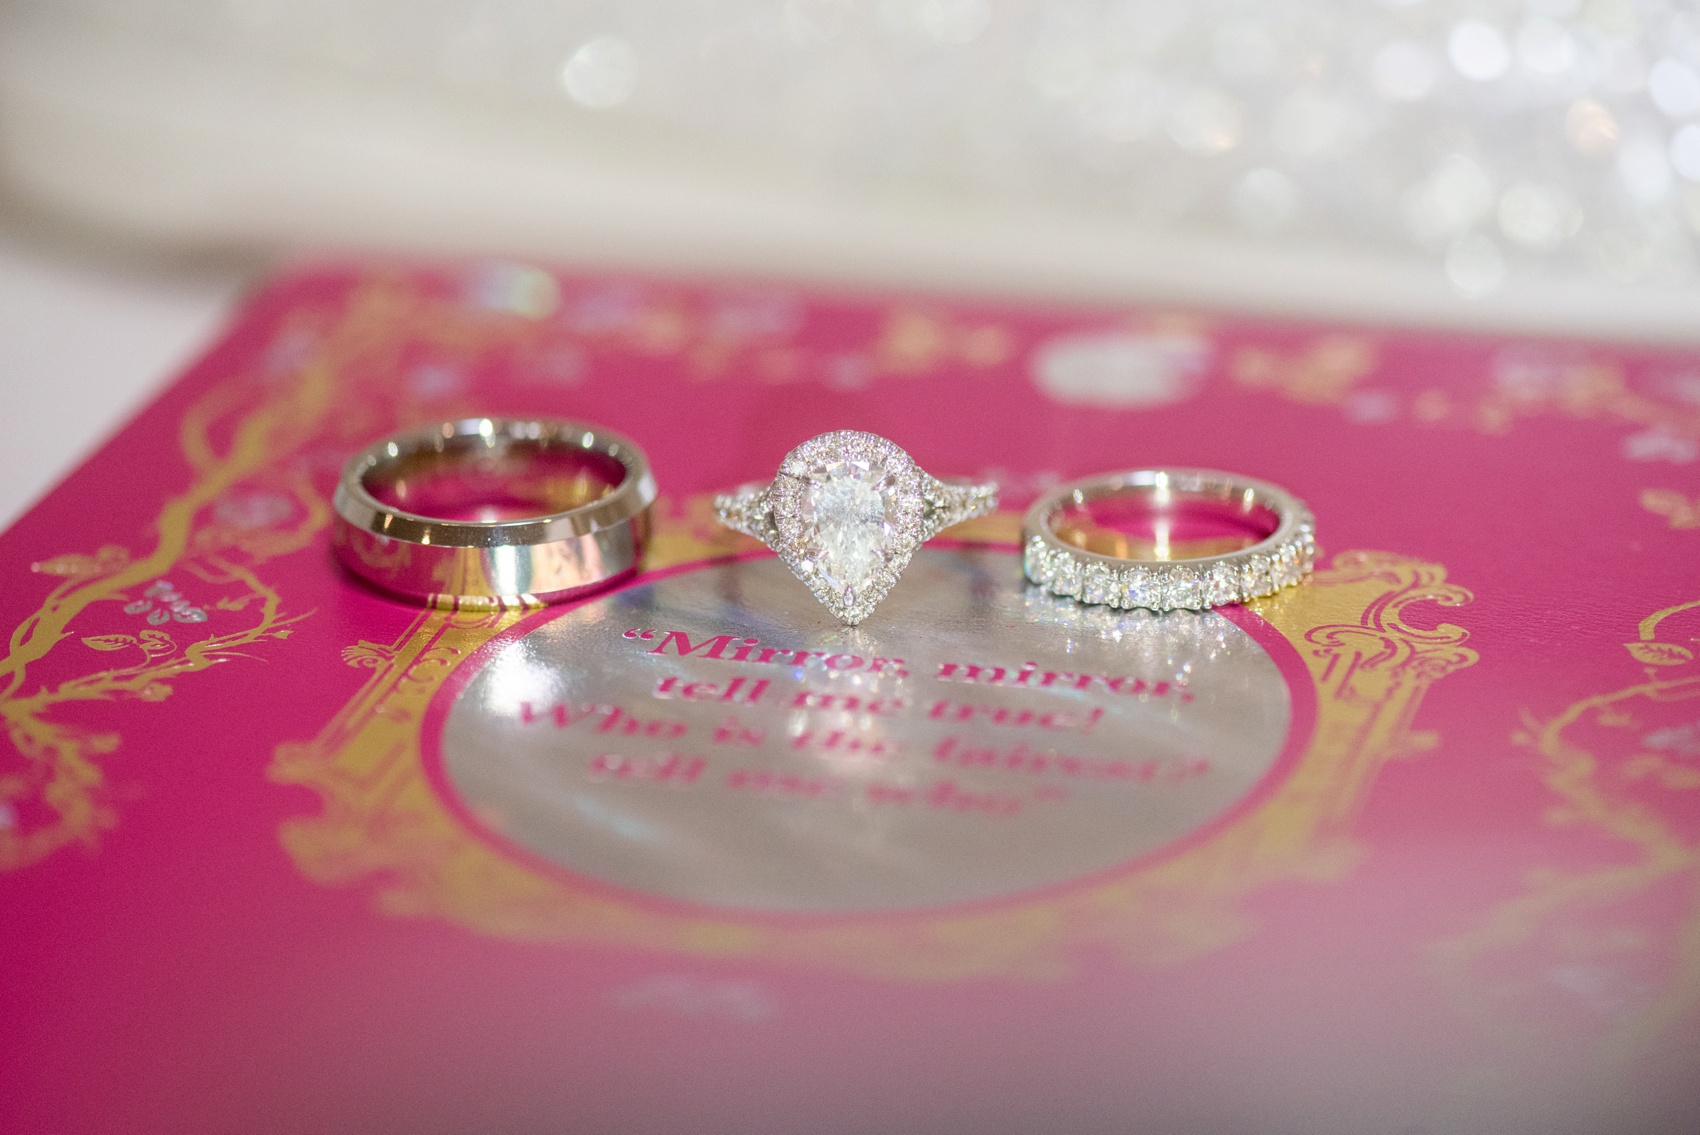 Olde Mill Inn New Jersey wedding by Mikkel Paige Photography, NYC and Raleigh wedding photographer. Ring photo with a teardrop pear shape diamond ring that was a family heirloom.